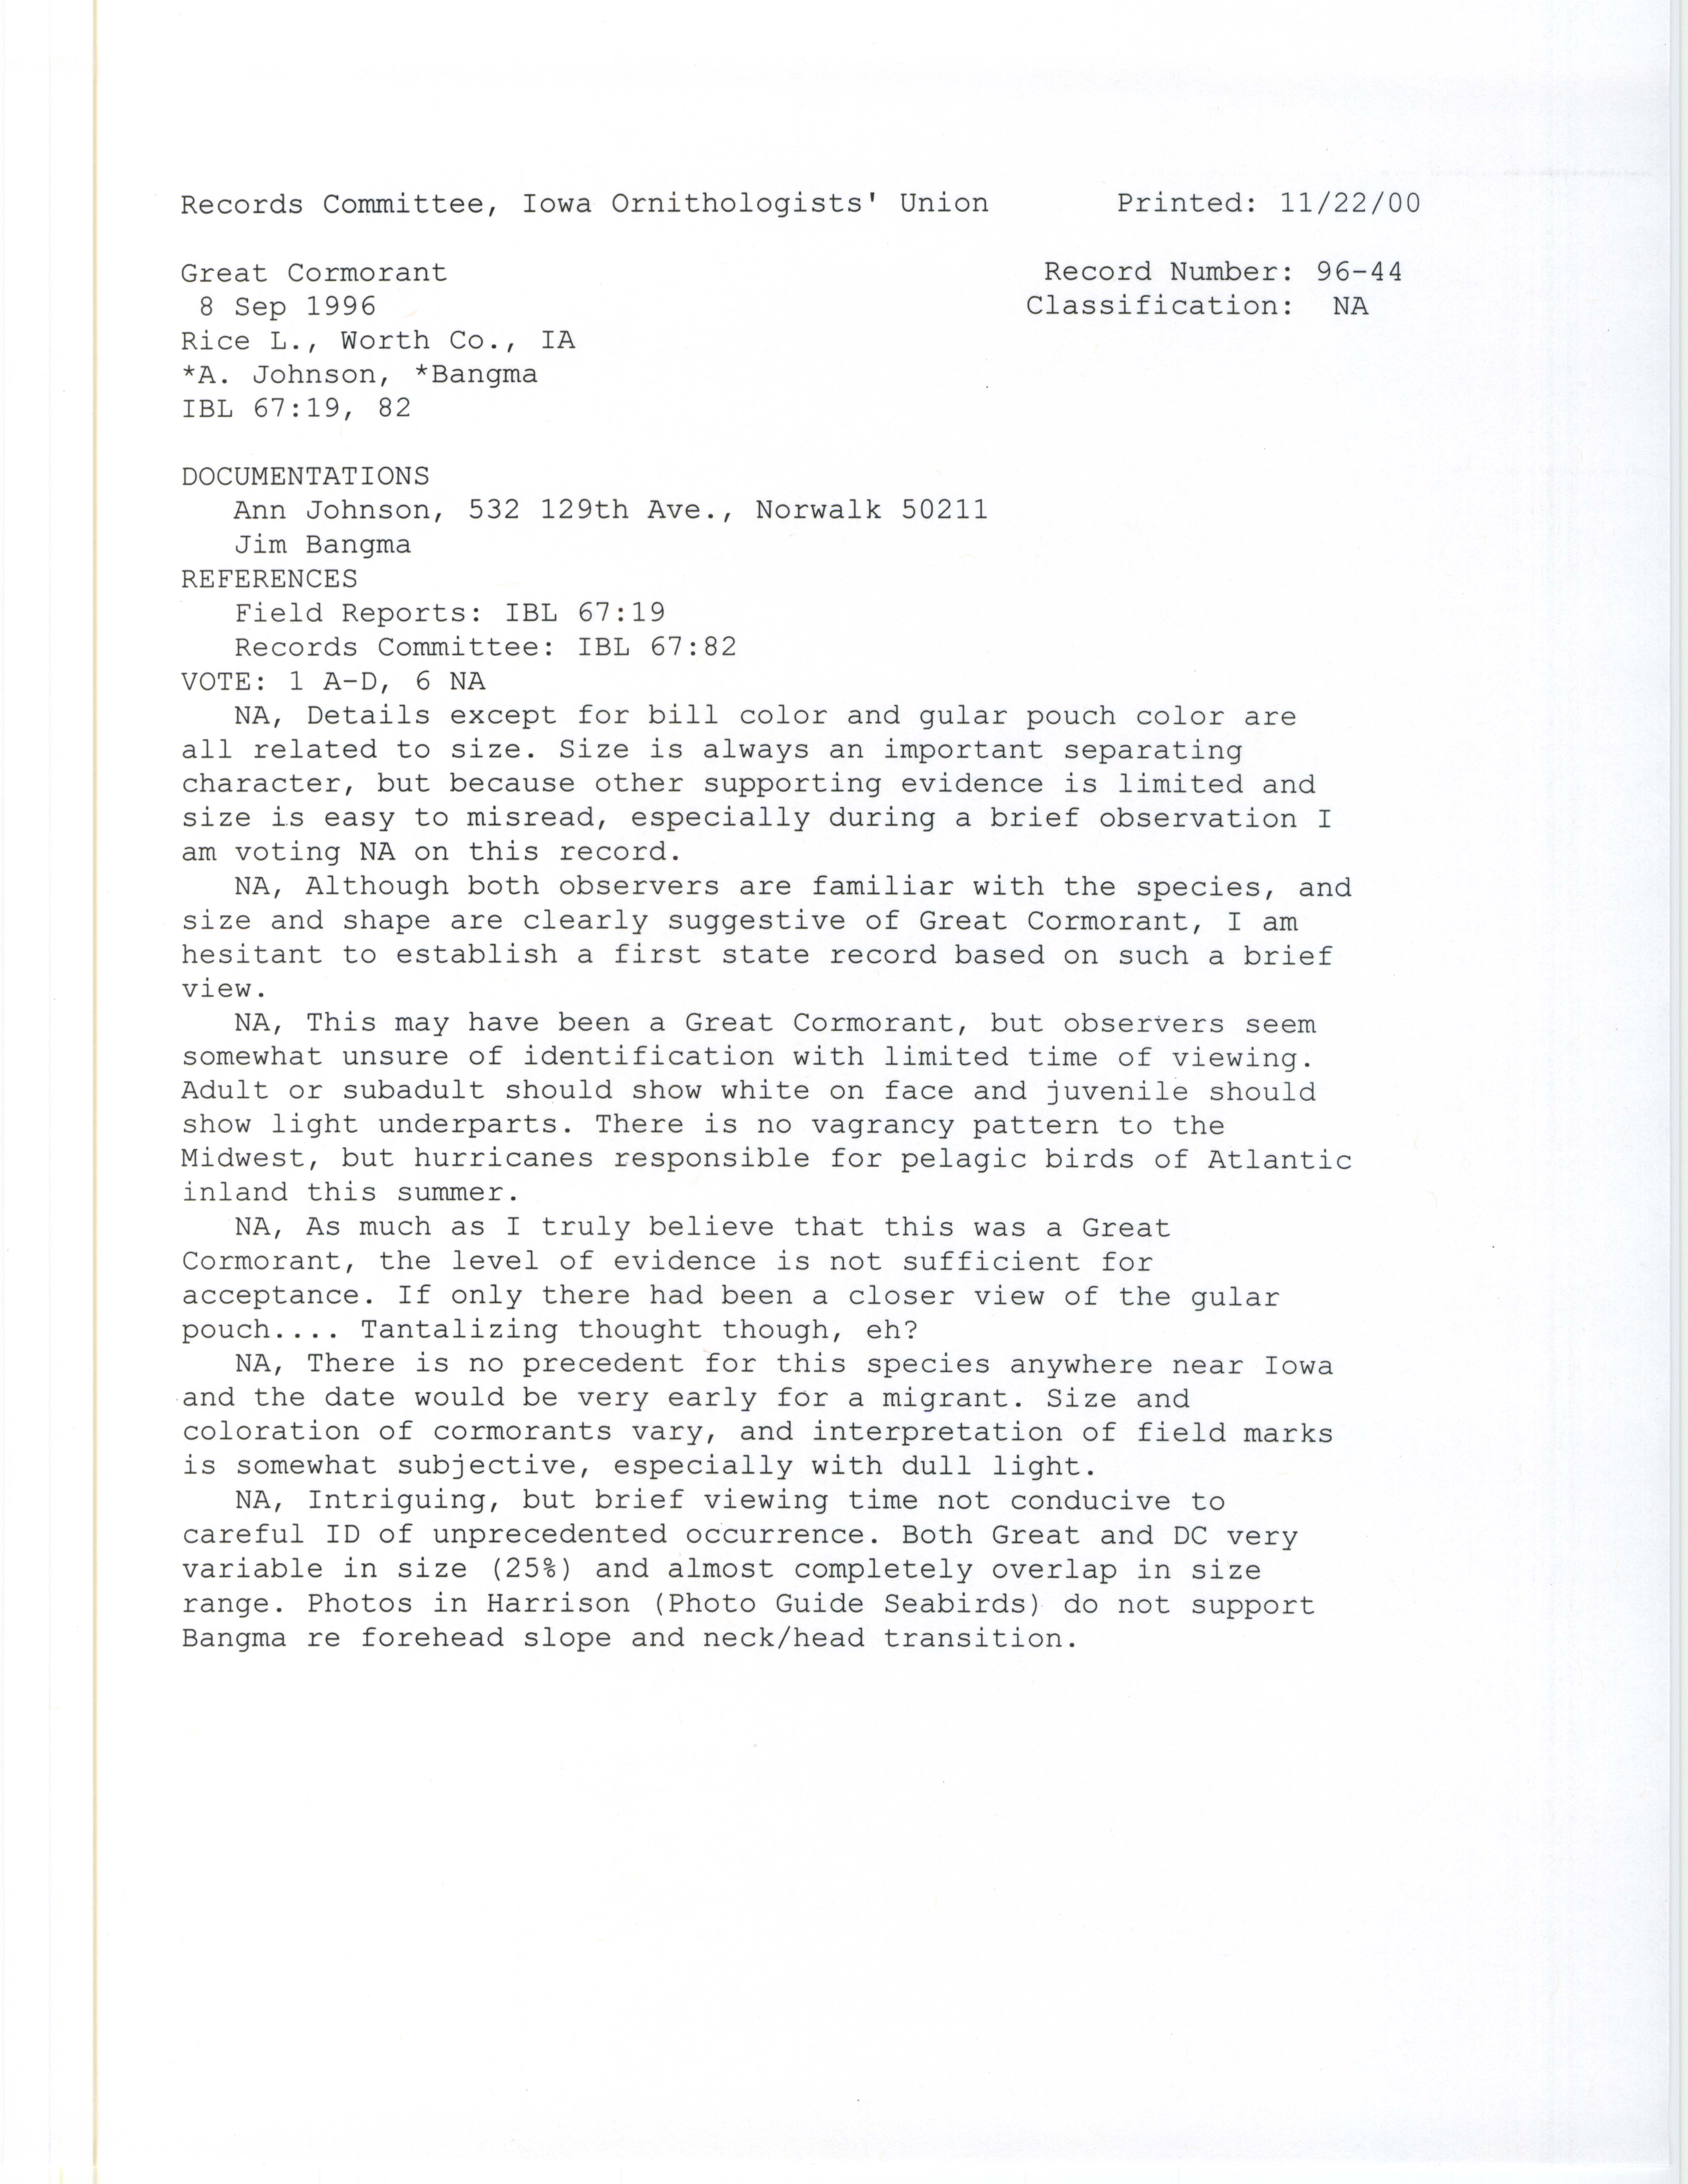 Records Committee review for rare bird sighting of Great Cormorant at Rice Lake, 1996